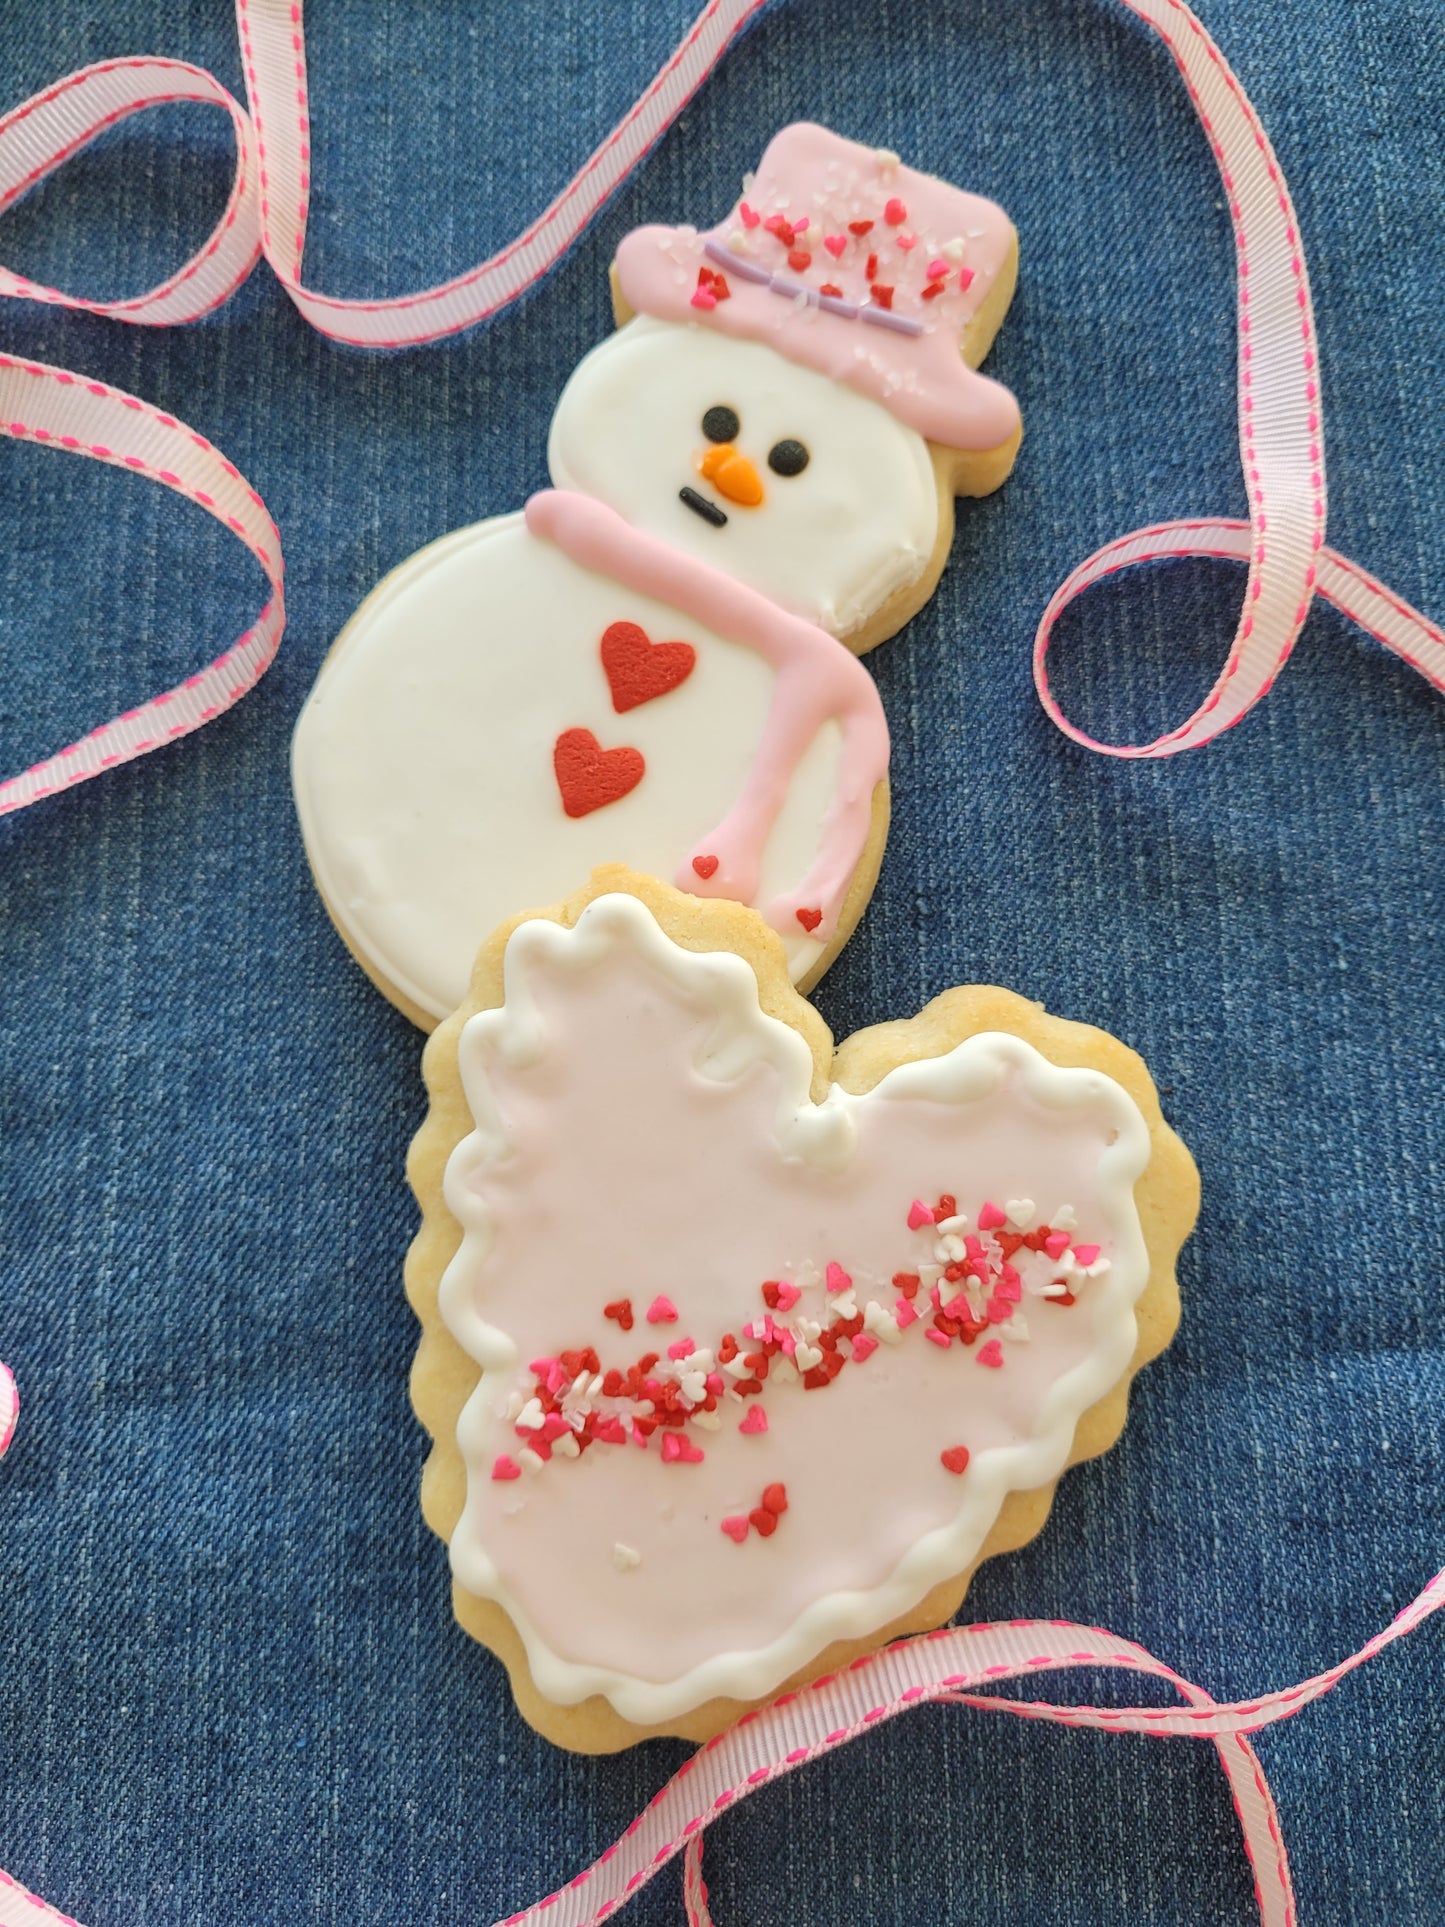 Decorated Sugar Cookies 16 count